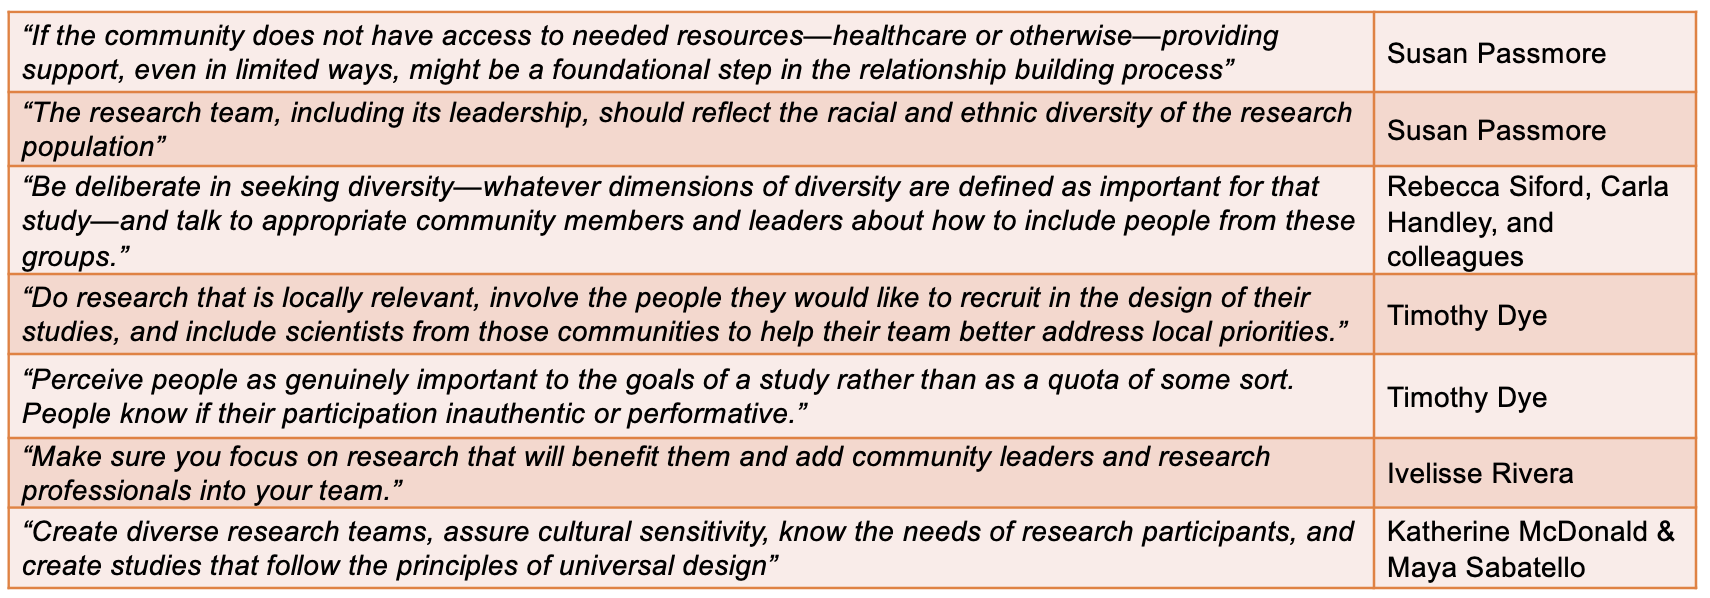 A table with quotes about recommendations for recruiting diverse participants, as discussed in the body text